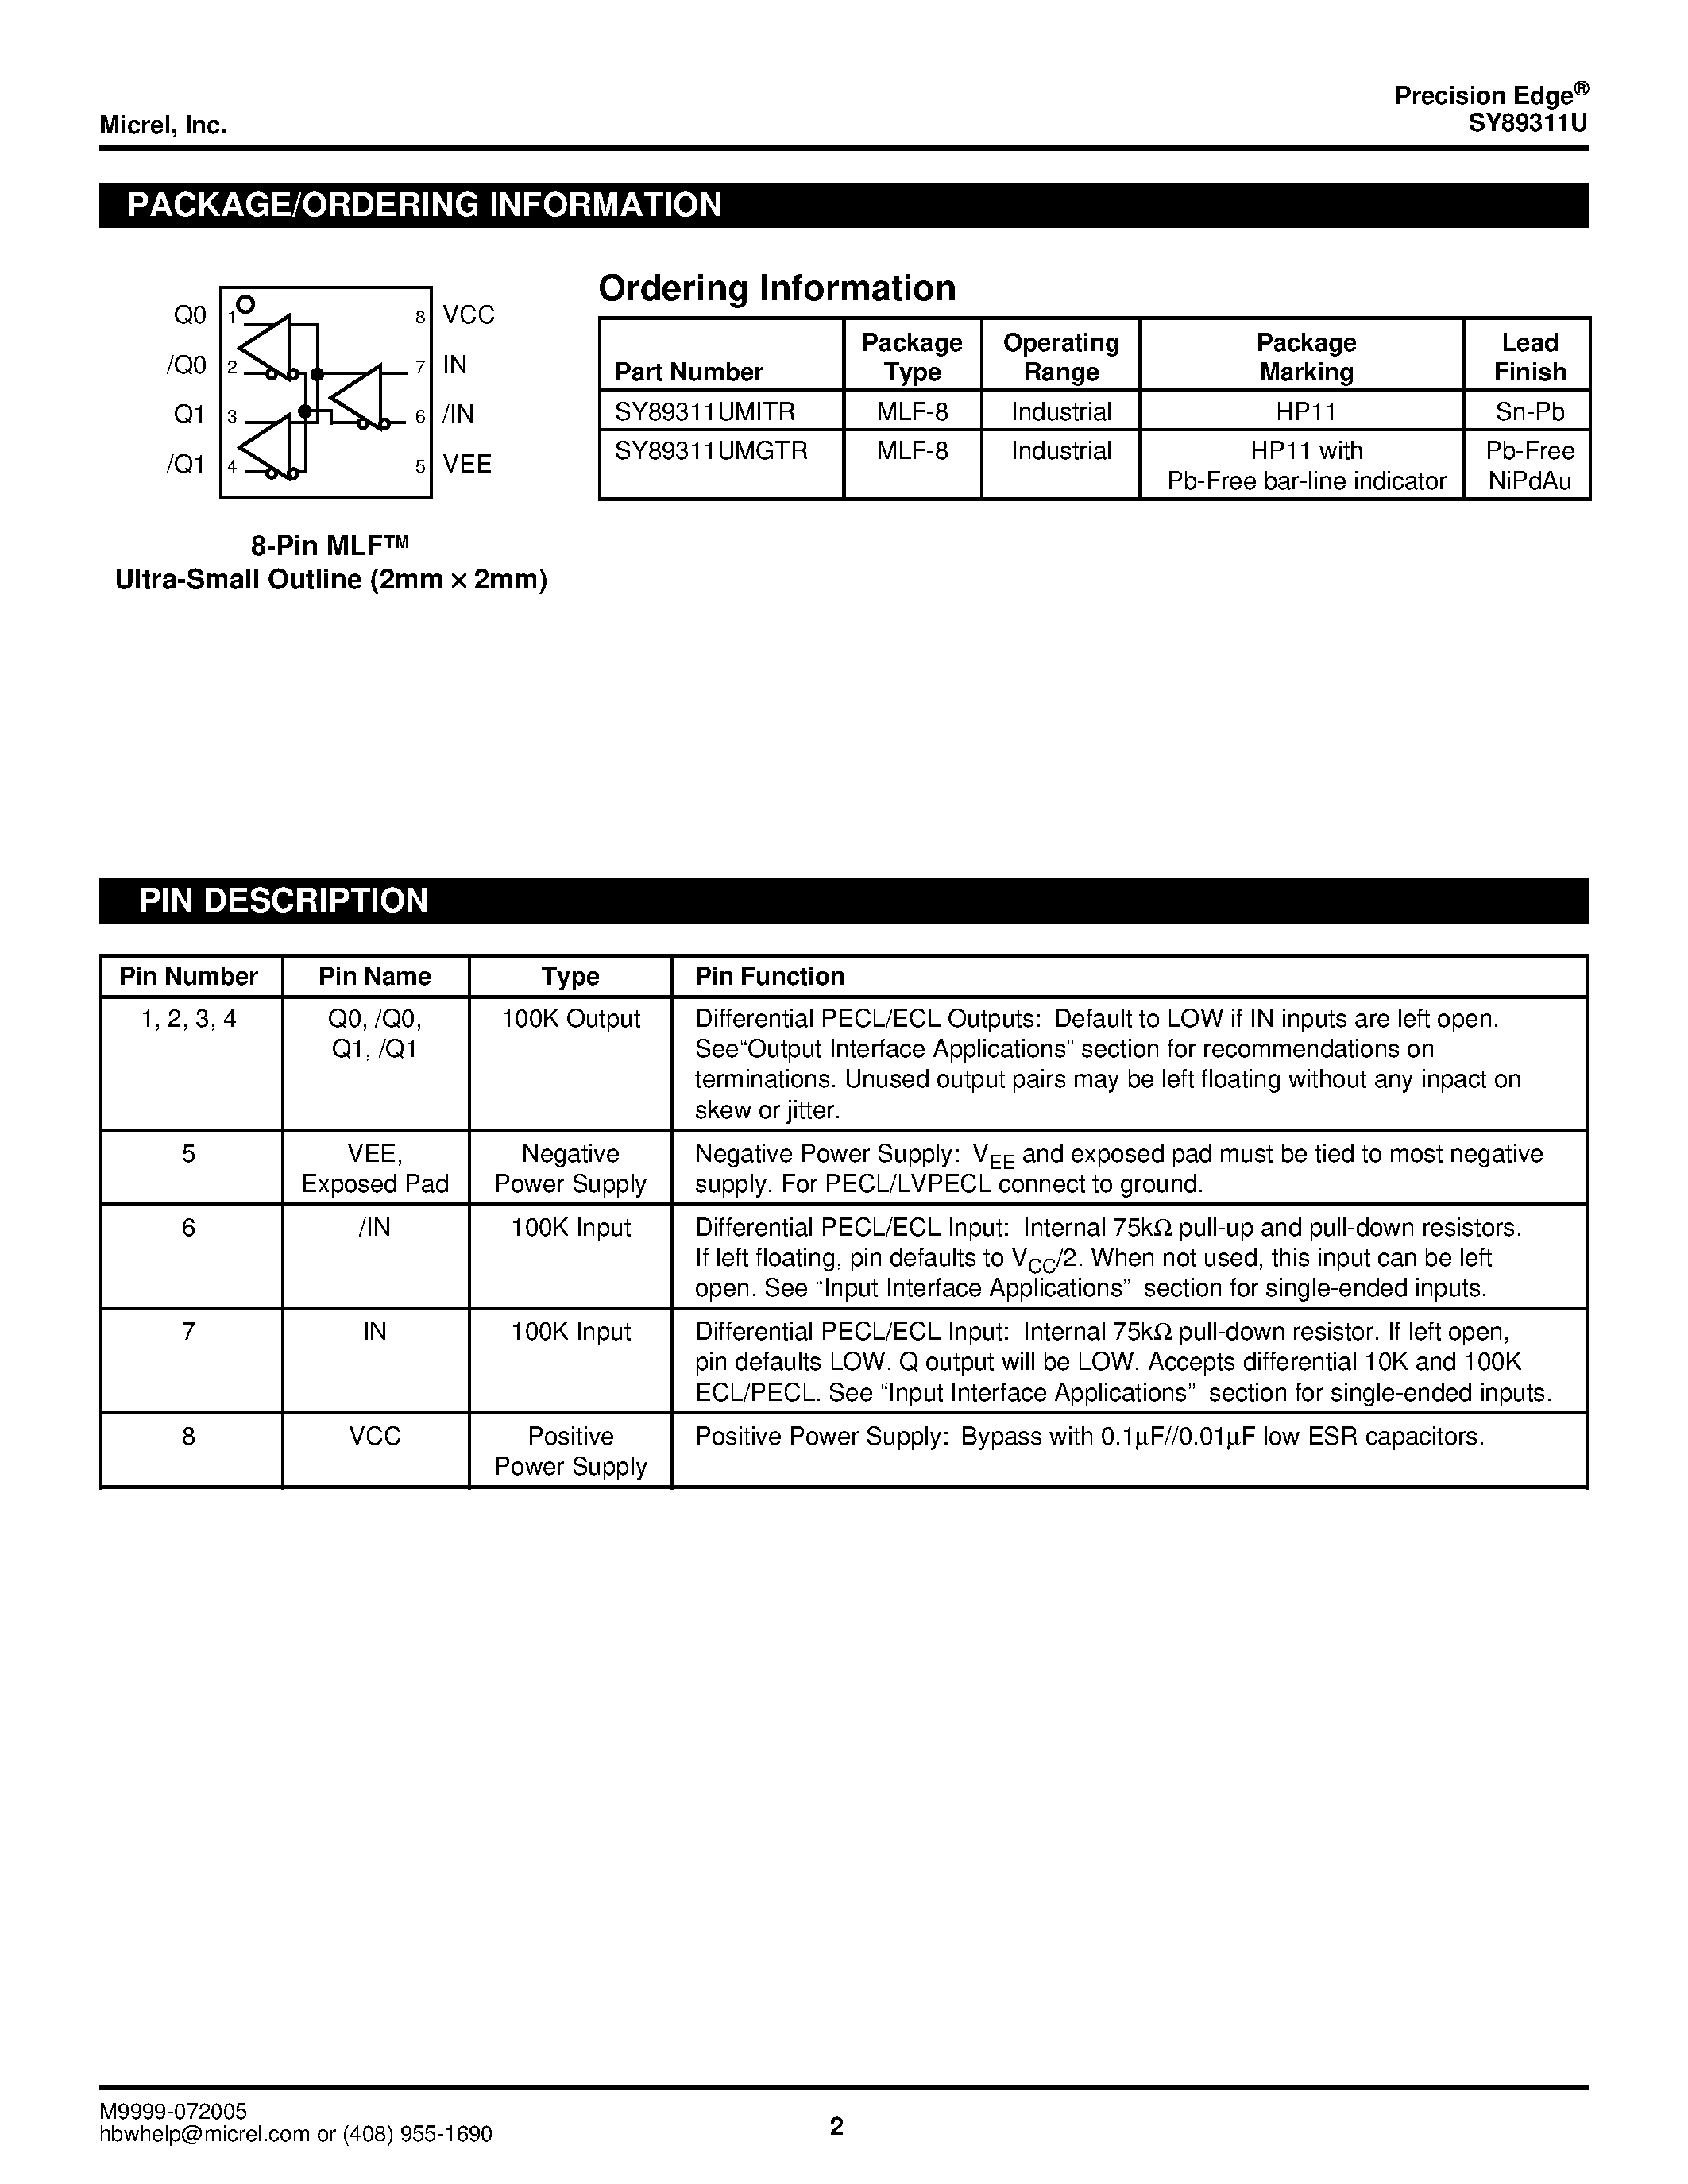 Datasheet SY89311U - 2.5V/3.3V/5V 1:2 DIFFERENTIAL PECL/LVPECL/ECL FANOUT BUFFER page 2